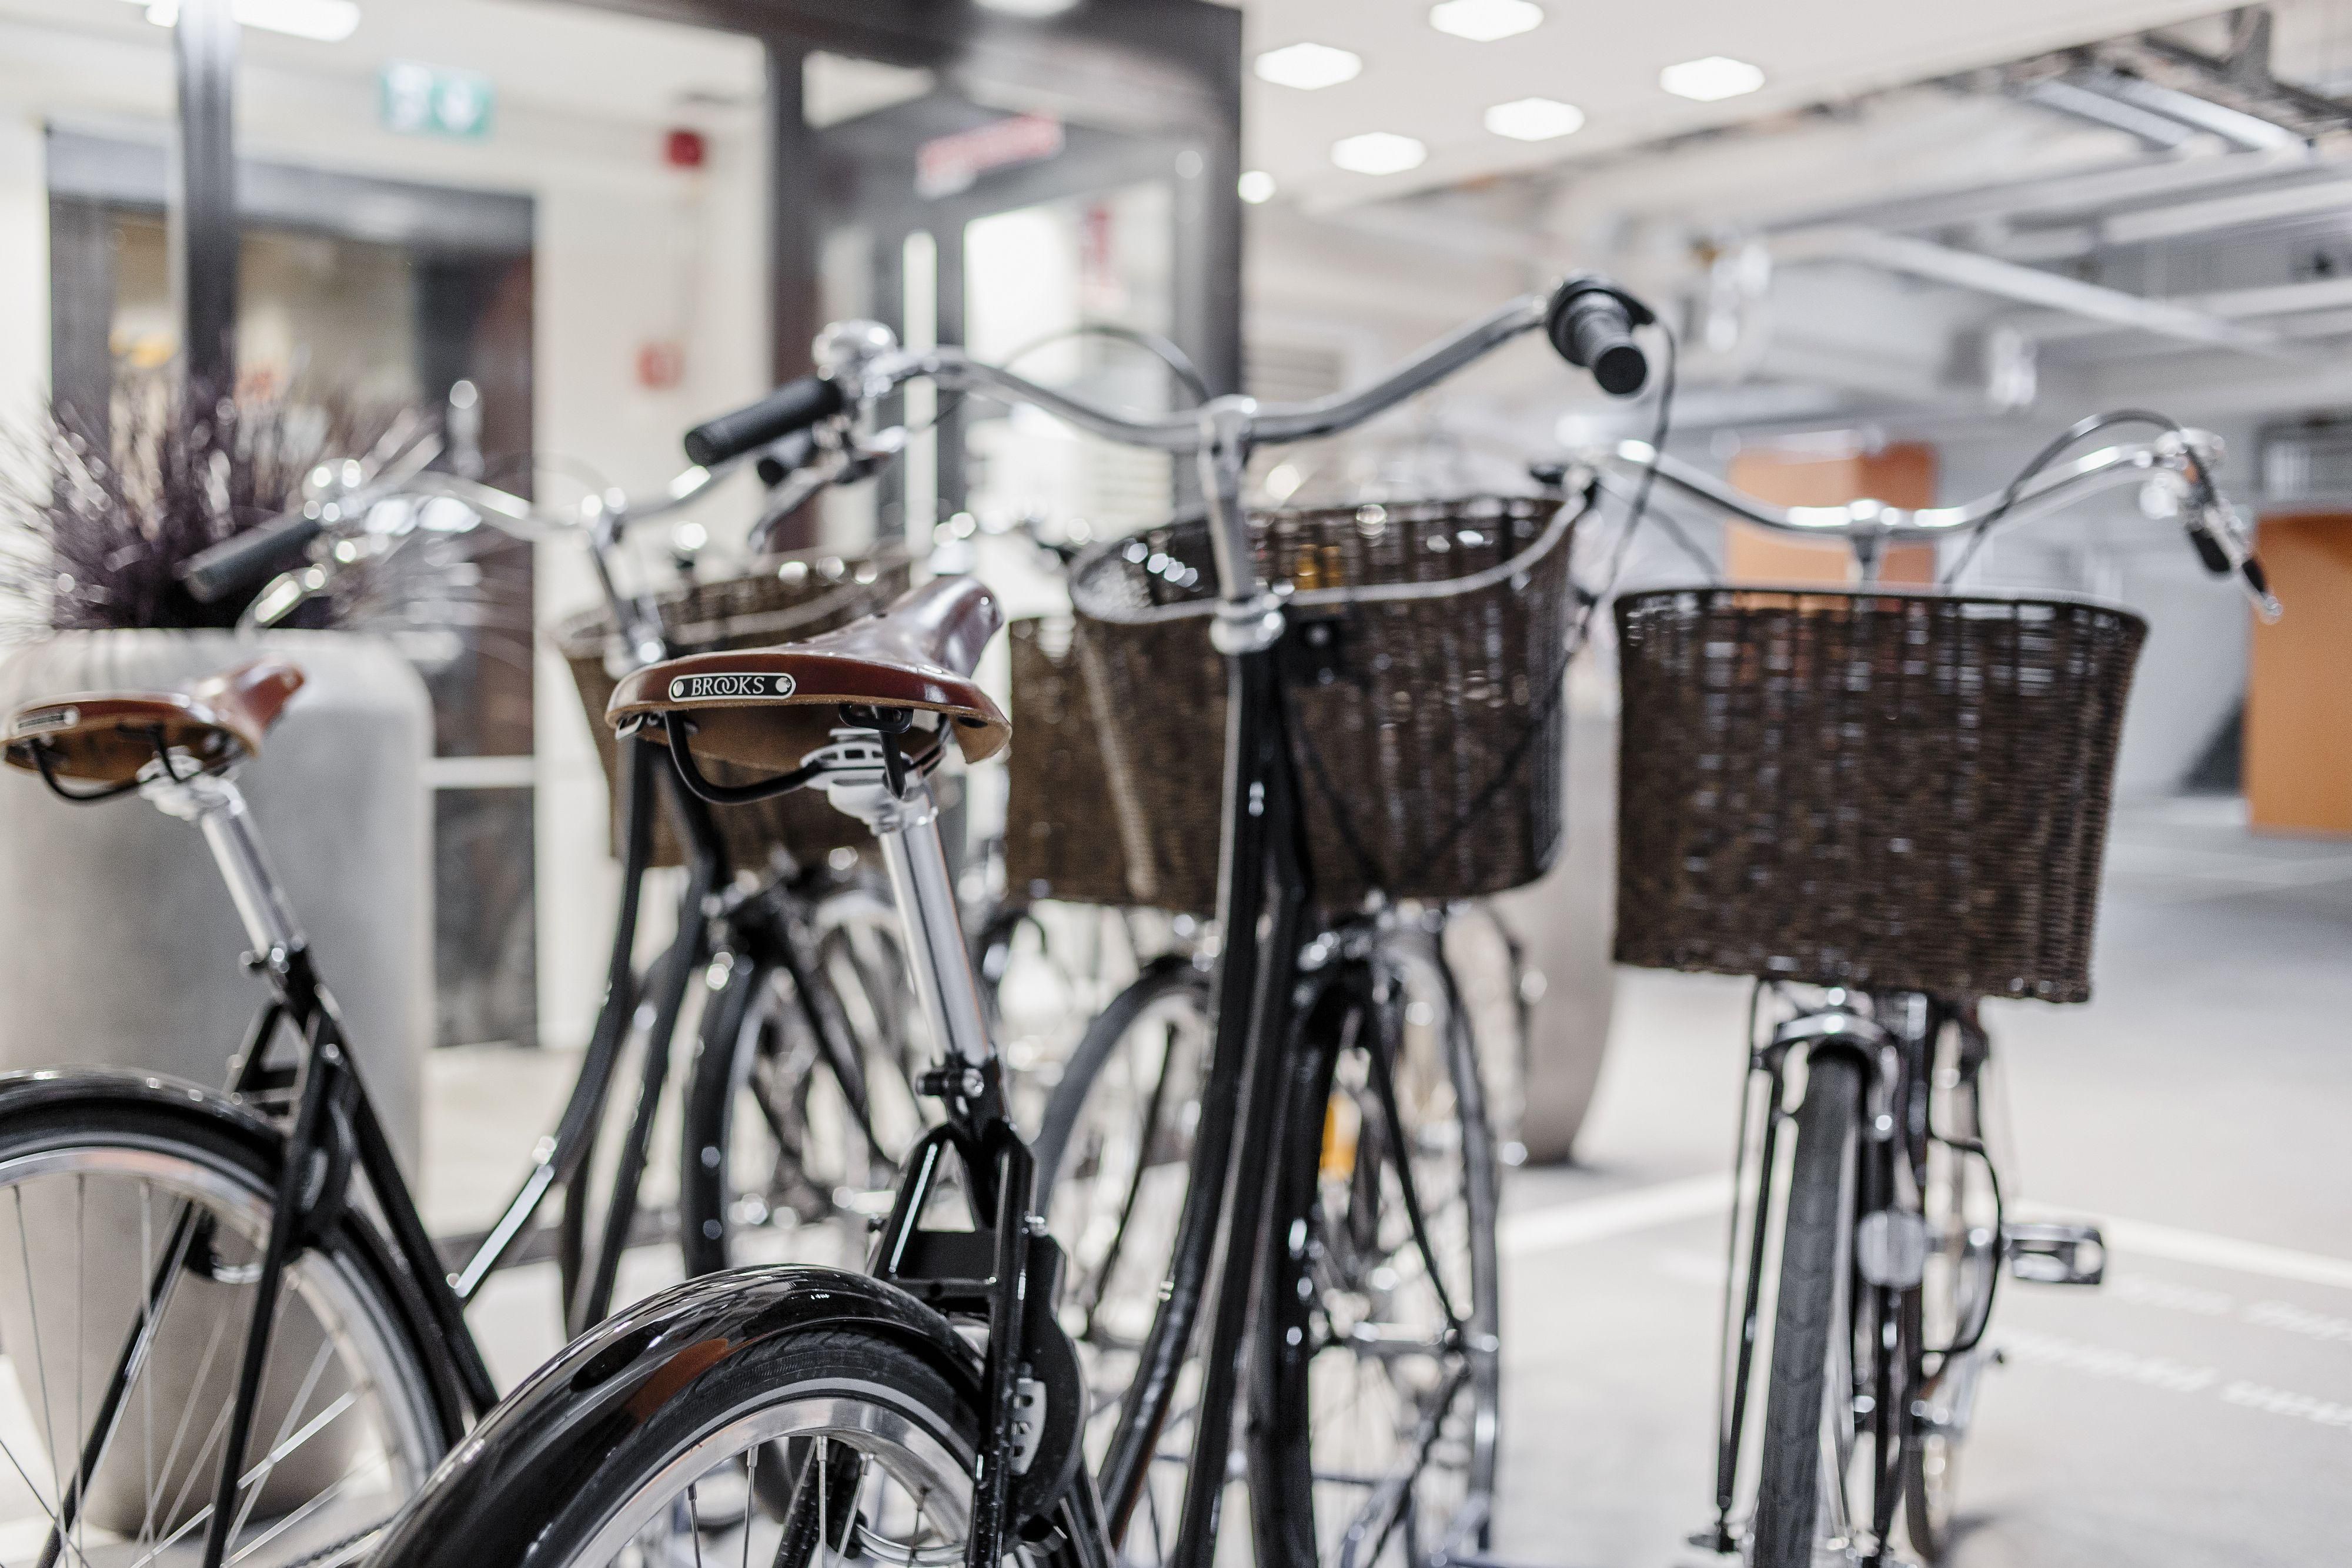 With our Pelago bikes, it is easy and convenient to go around and see the best sights of Helsinki. Click the link below and select our Neighbourhood to check out what places we recommend you to visit.